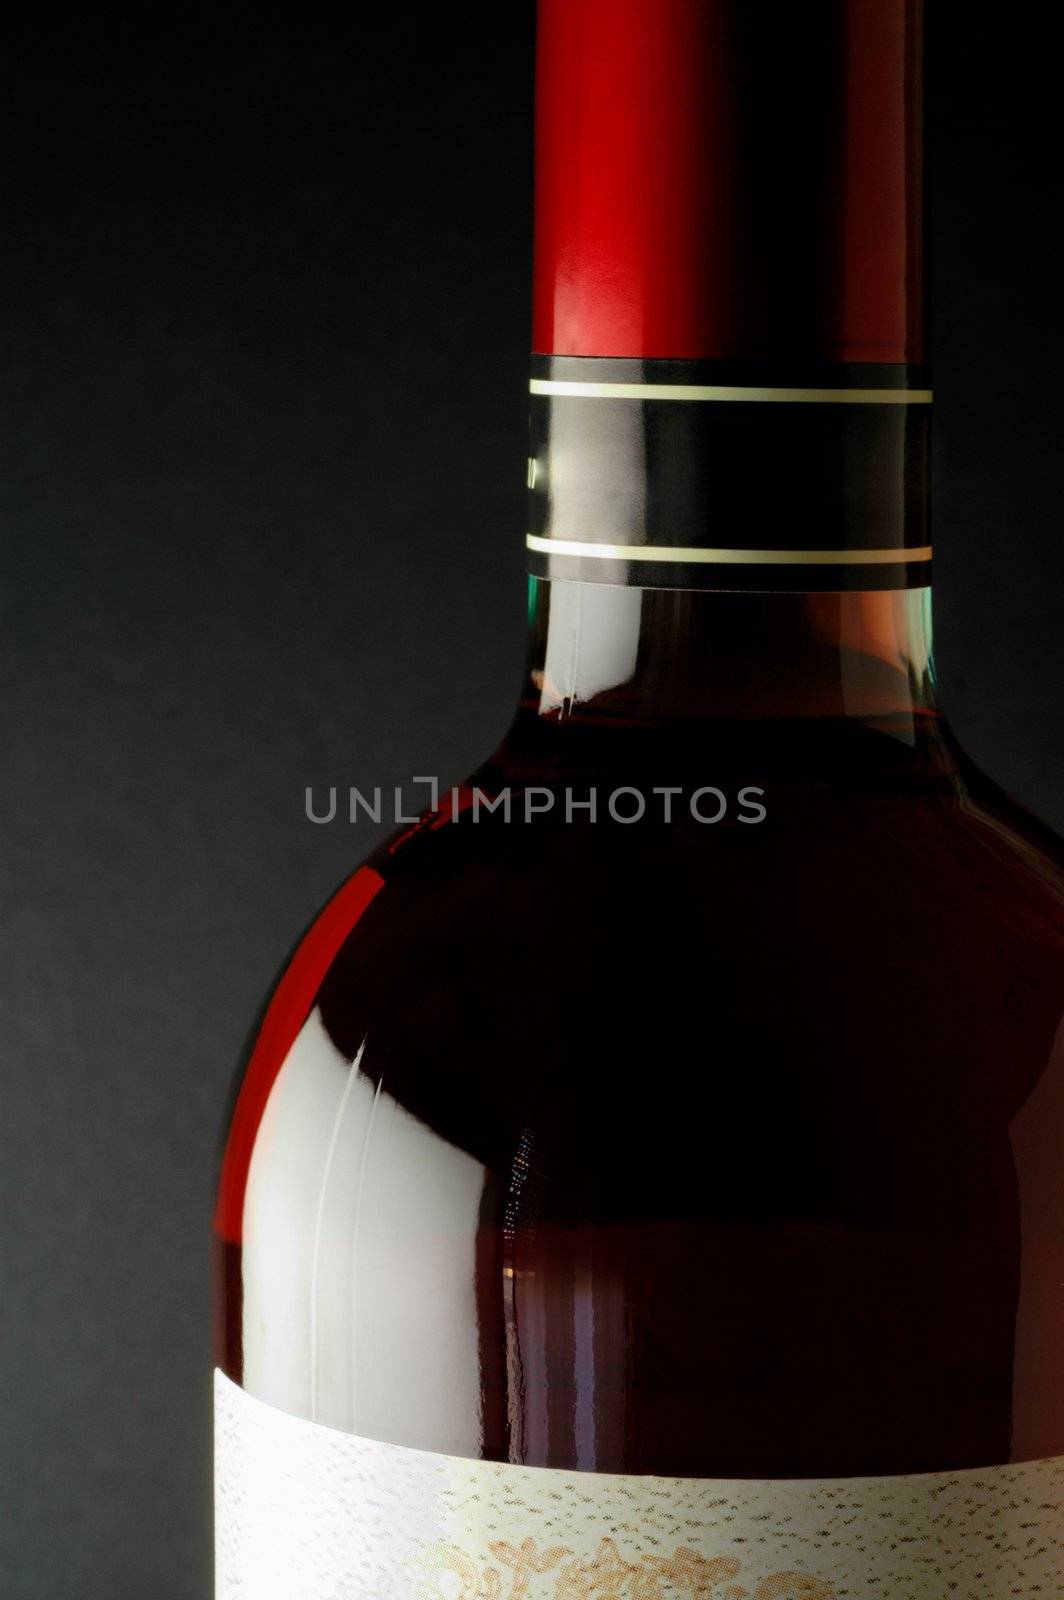 Red wine bottle closeup with red capsule (closeup)
